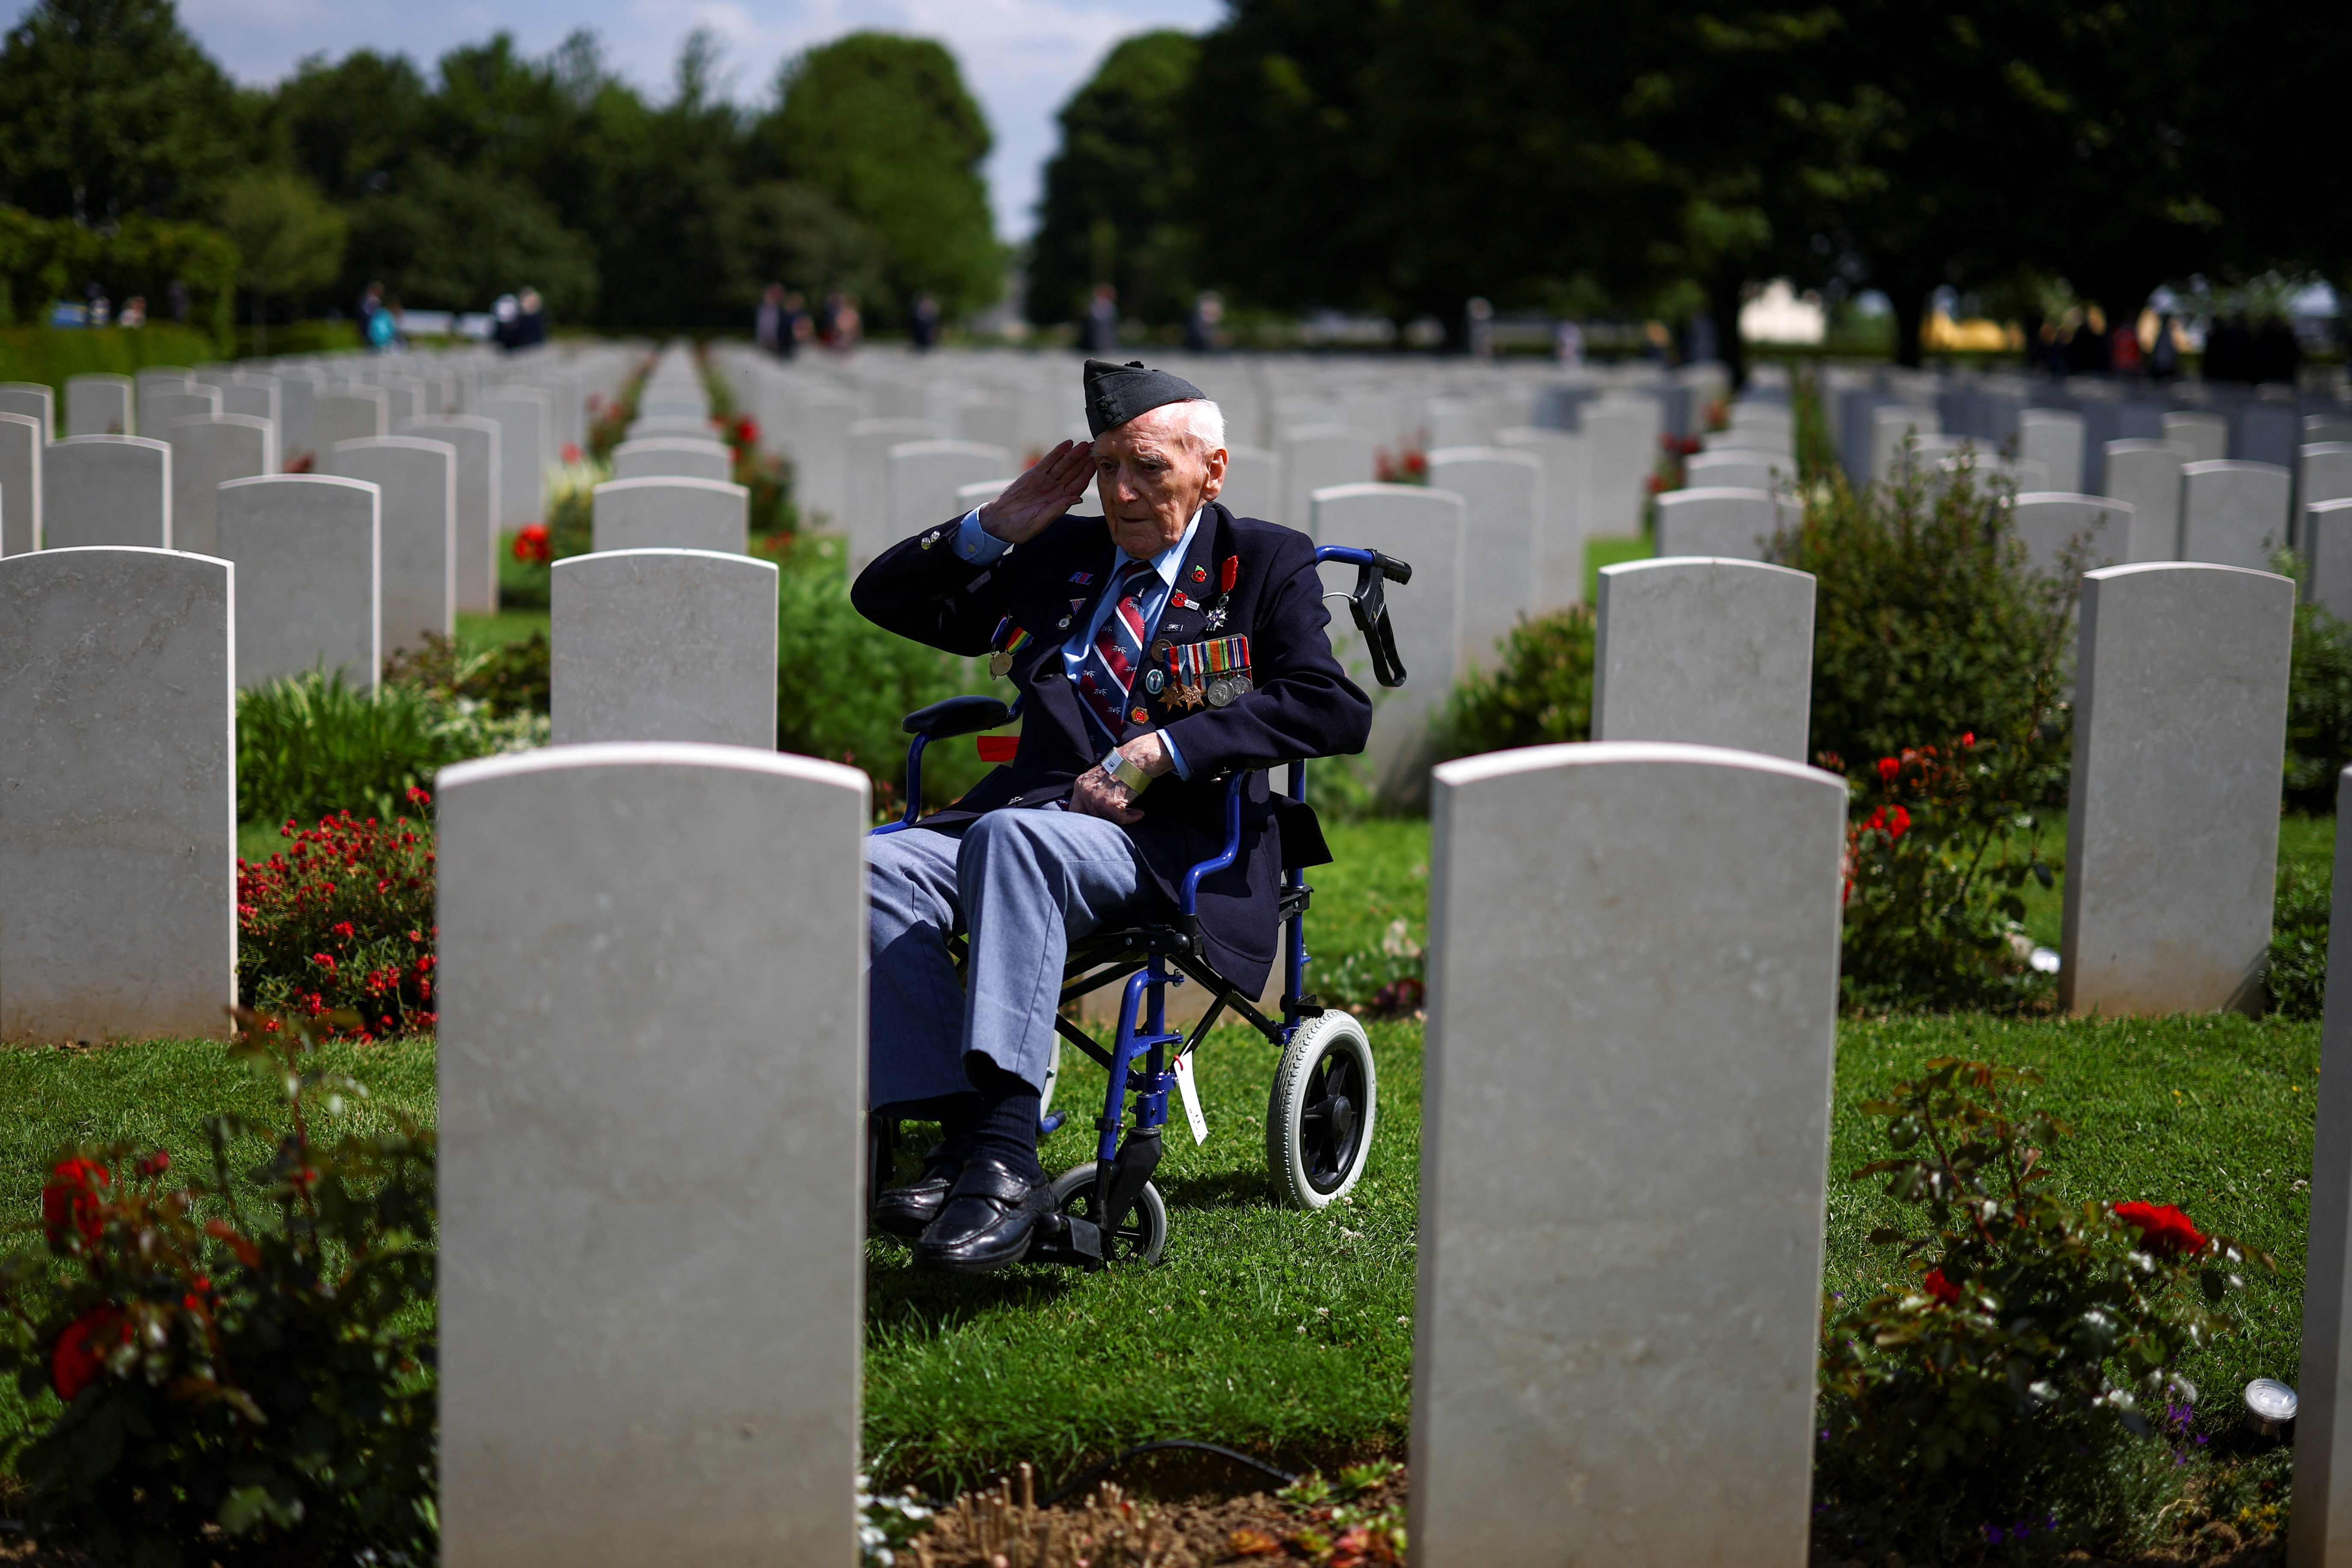 Commemorative events for the 80th anniversary of D-Day in Bayeux cemetery